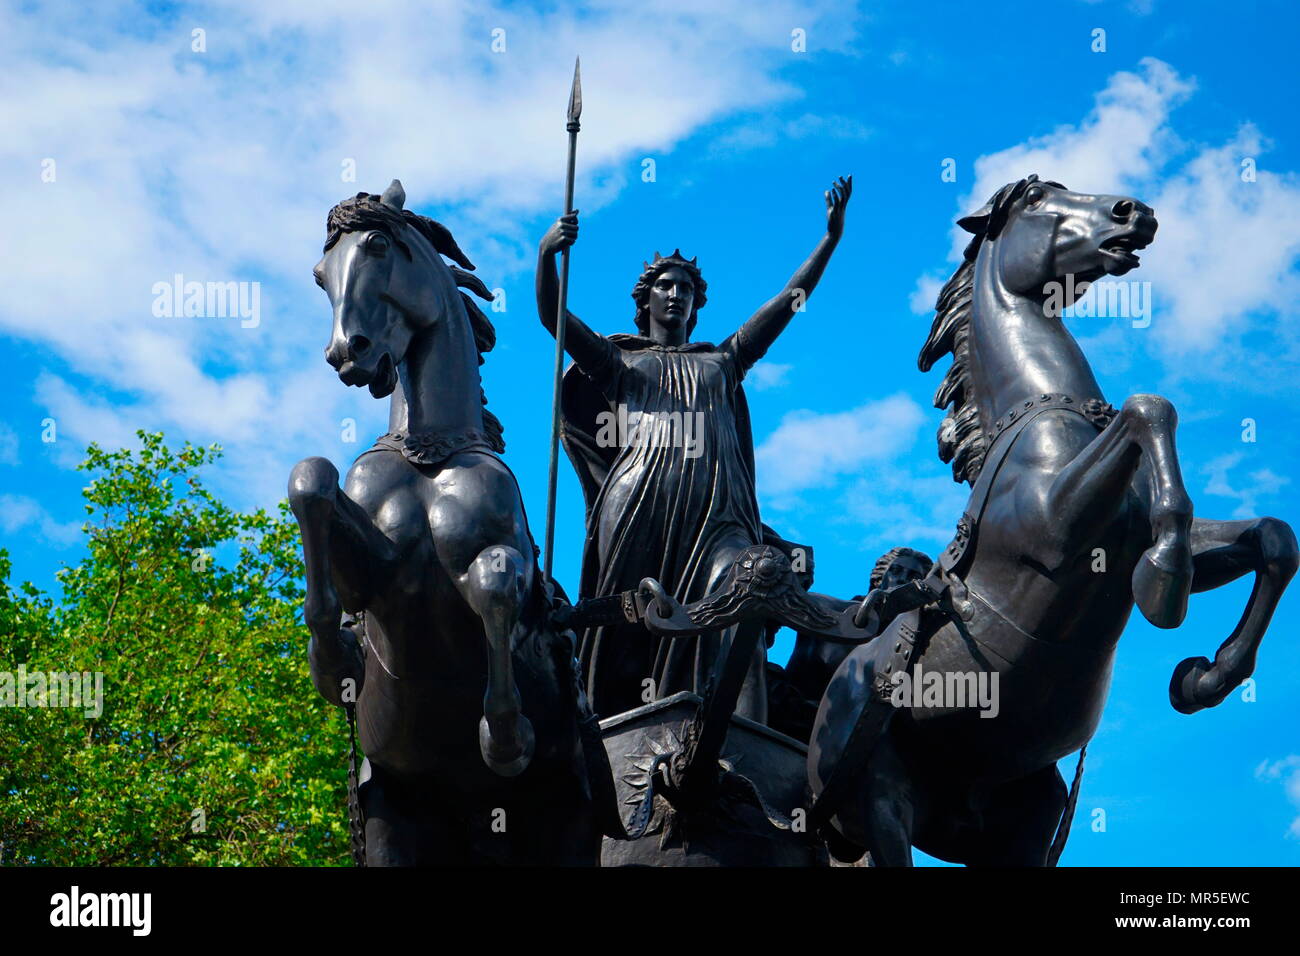 Thomas Thorneycroft's statue of Boadicea and her Daughters in London. Boudicca or Boudicca was a queen of the British Celtic Iceni tribe who led an uprising against the occupying forces of the Roman Empire in AD 60 or 61, and died shortly after its failure. Stock Photo